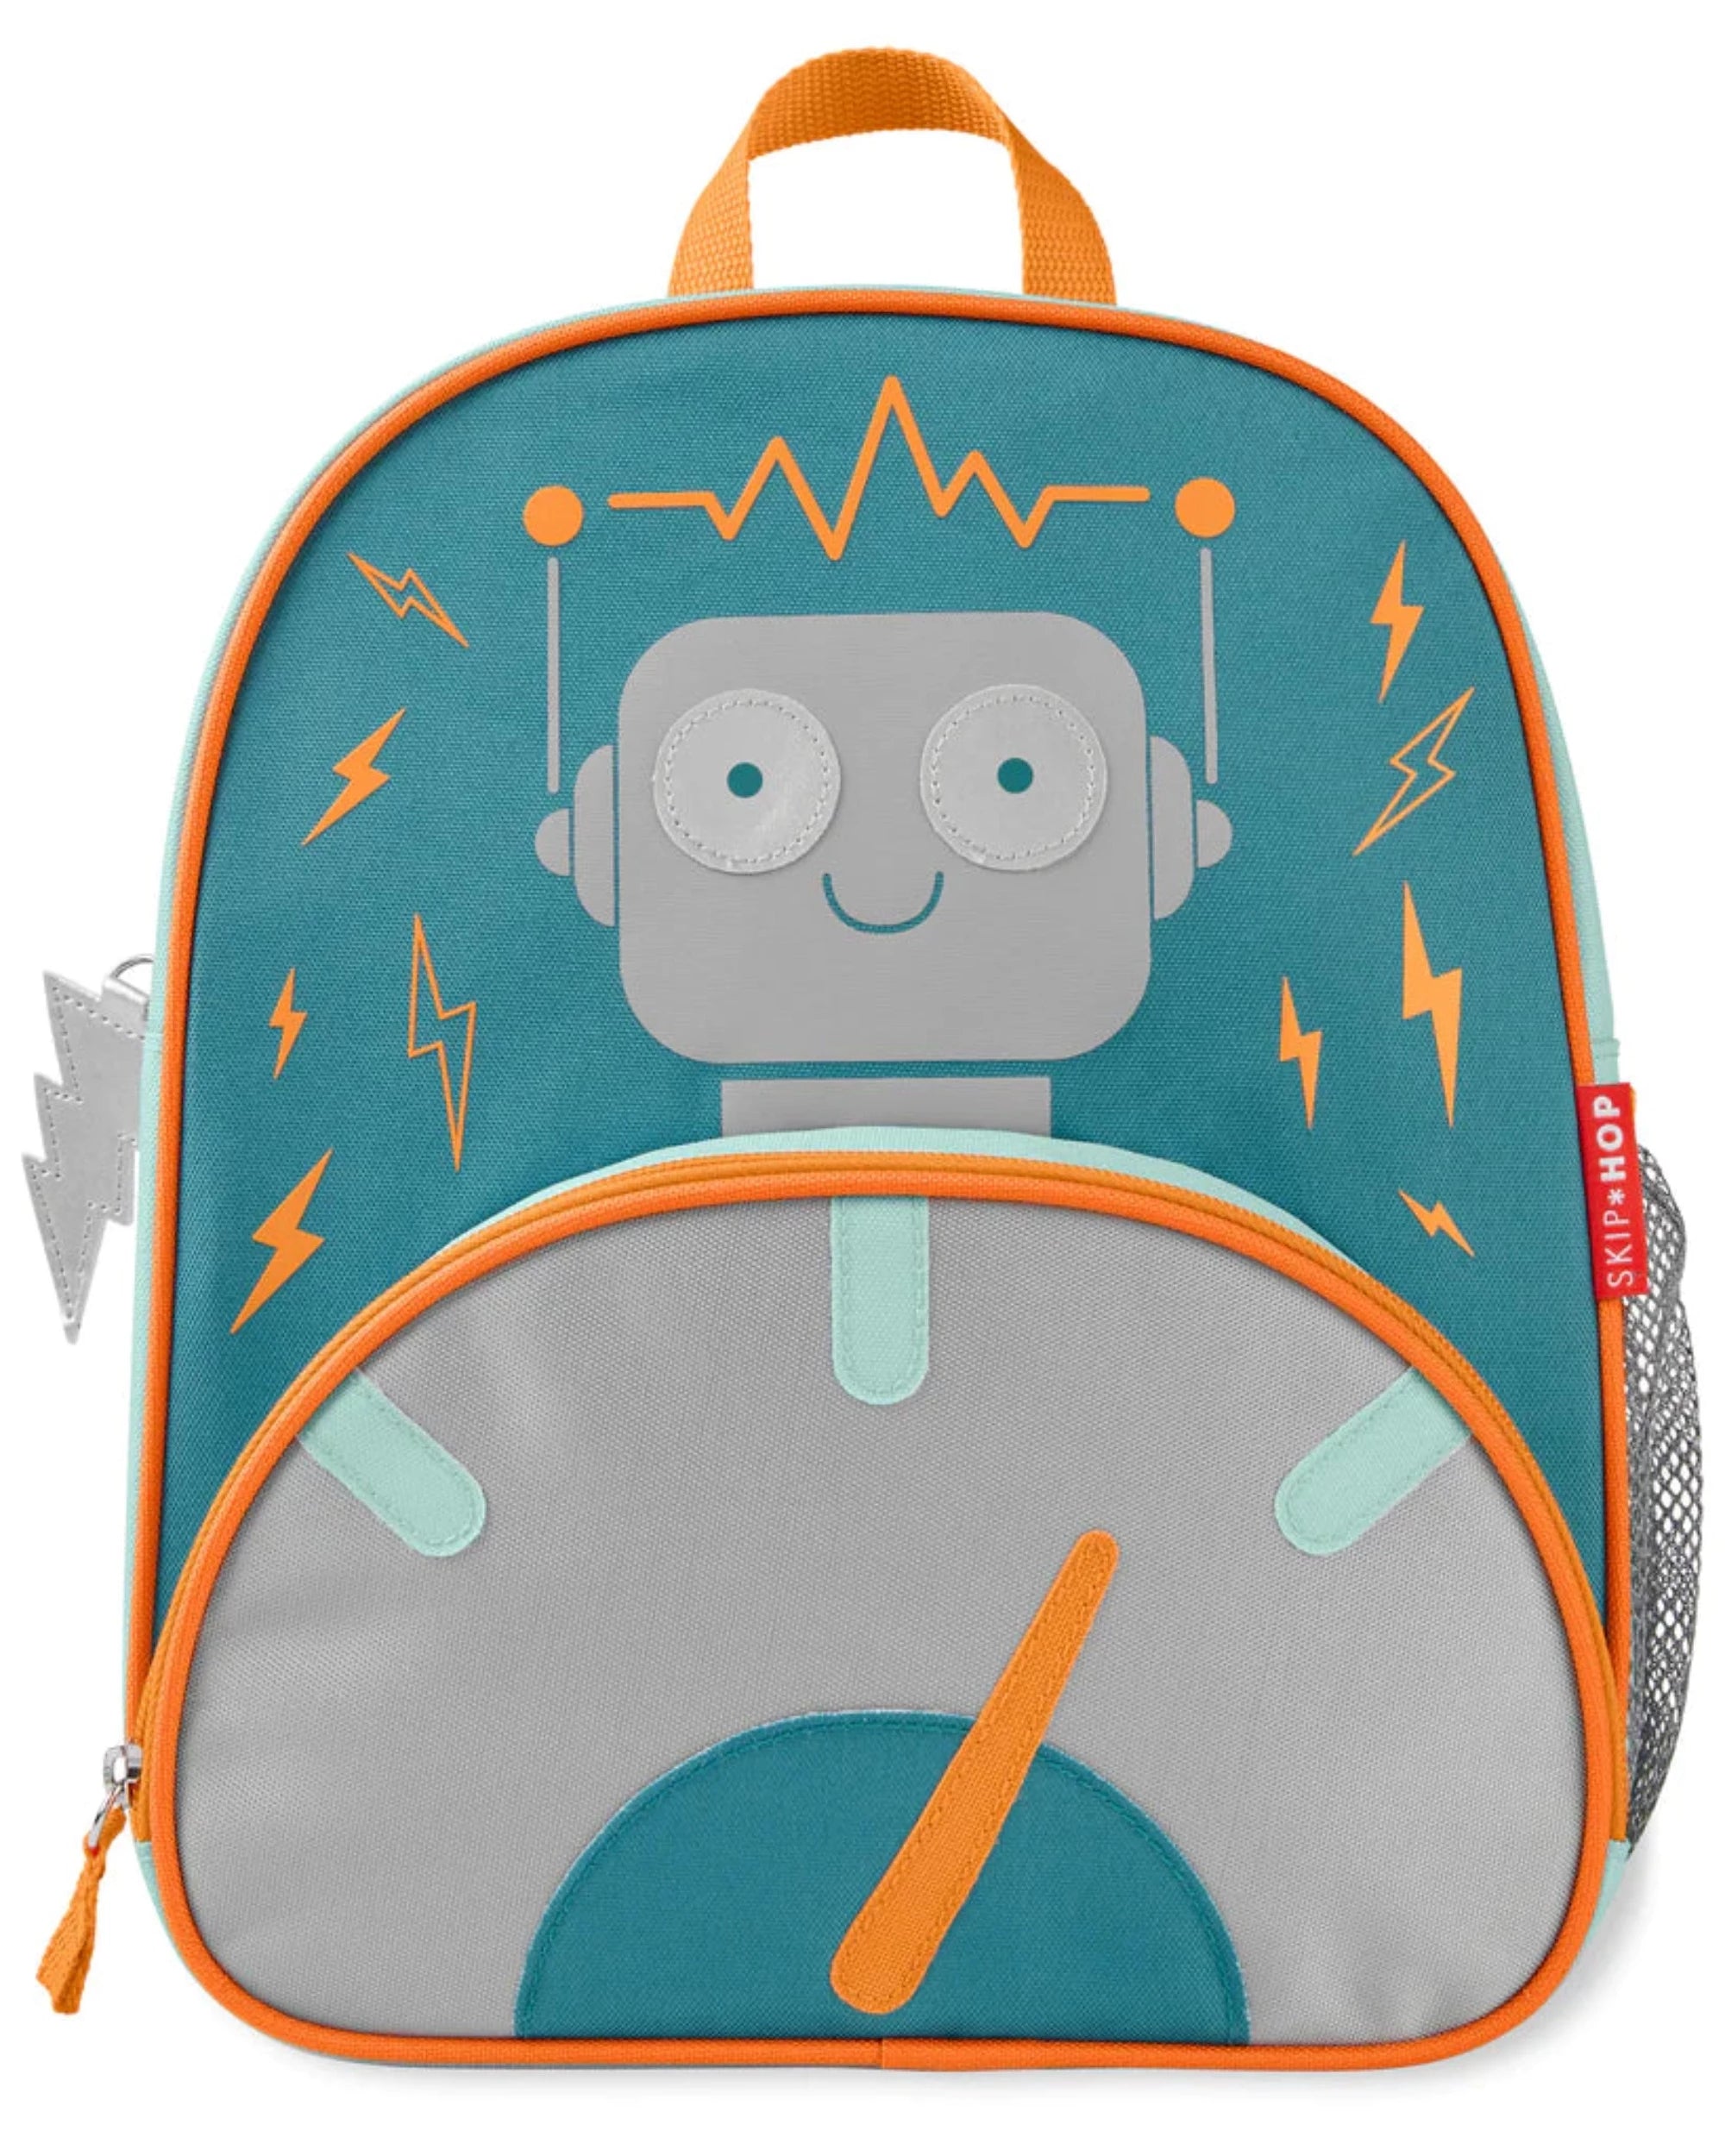 Skip Hop Spark Style Little Kid Backpack - Robot - Tiny Tots Baby Store 